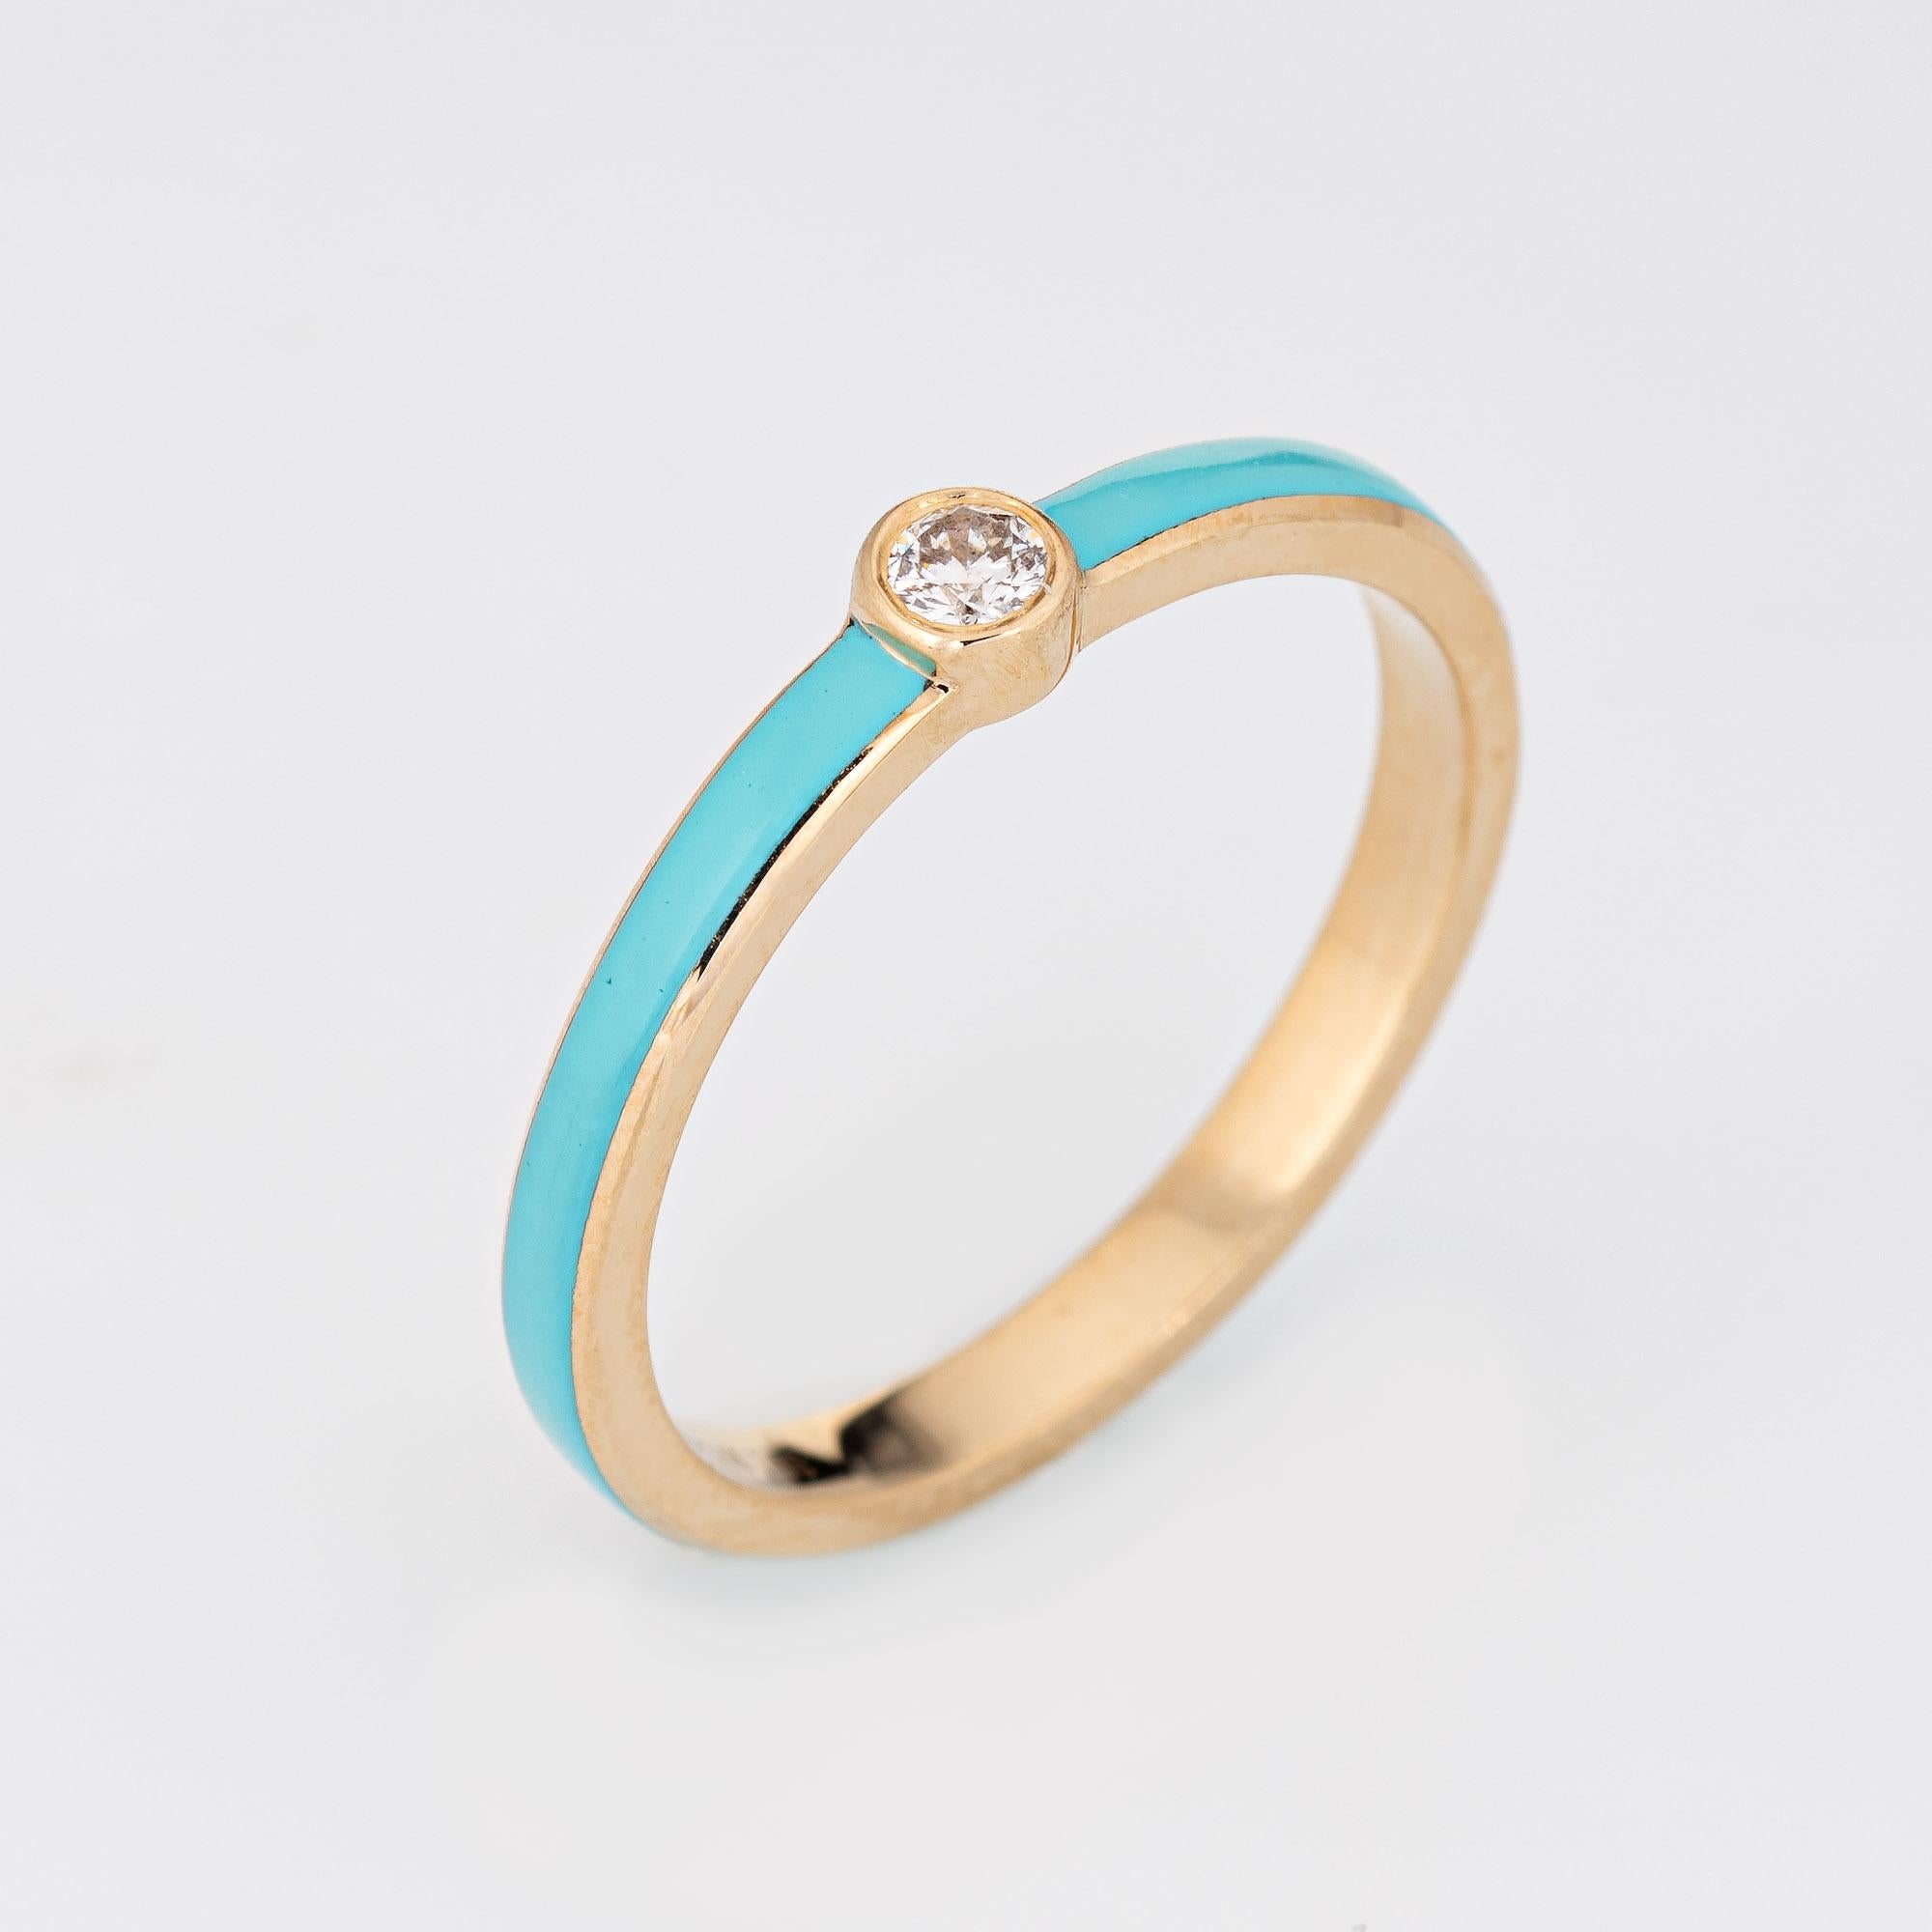 Stylish turquoise & diamond stacking band crafted in 14 karat yellow gold. 

1 round brilliant cut diamonds total an estimated 0.03 carats (estimated at H-I color and SI2 clarity). 

The enameled band is a striking turquoise color with a small